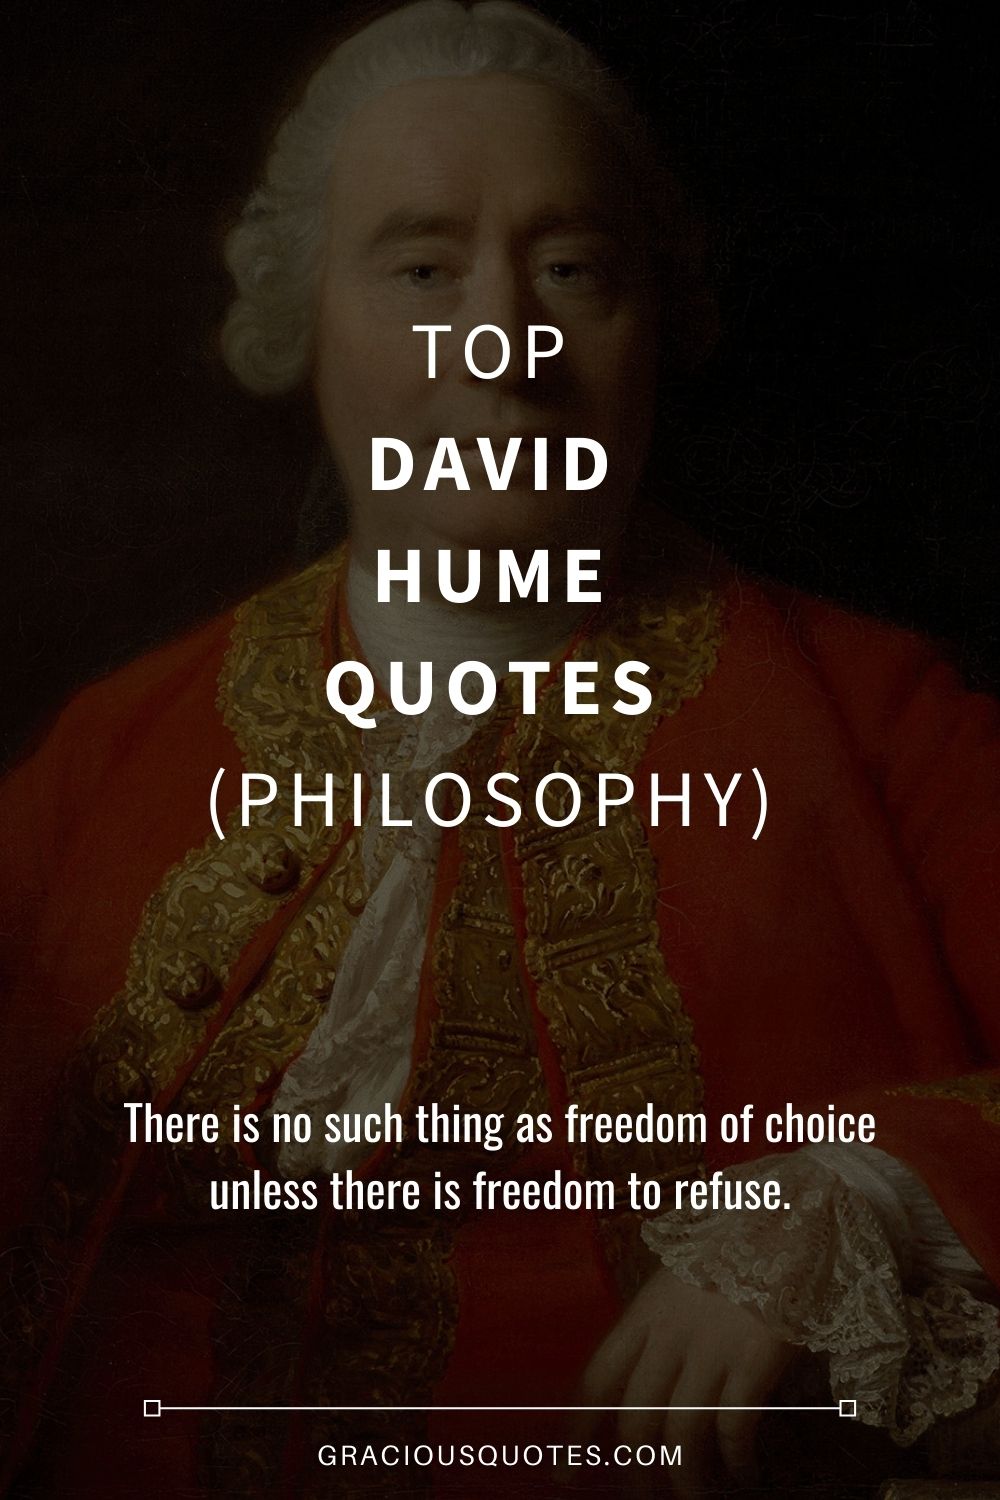 Top David Hume Quotes (PHILOSOPHY) - Gracious Quotes